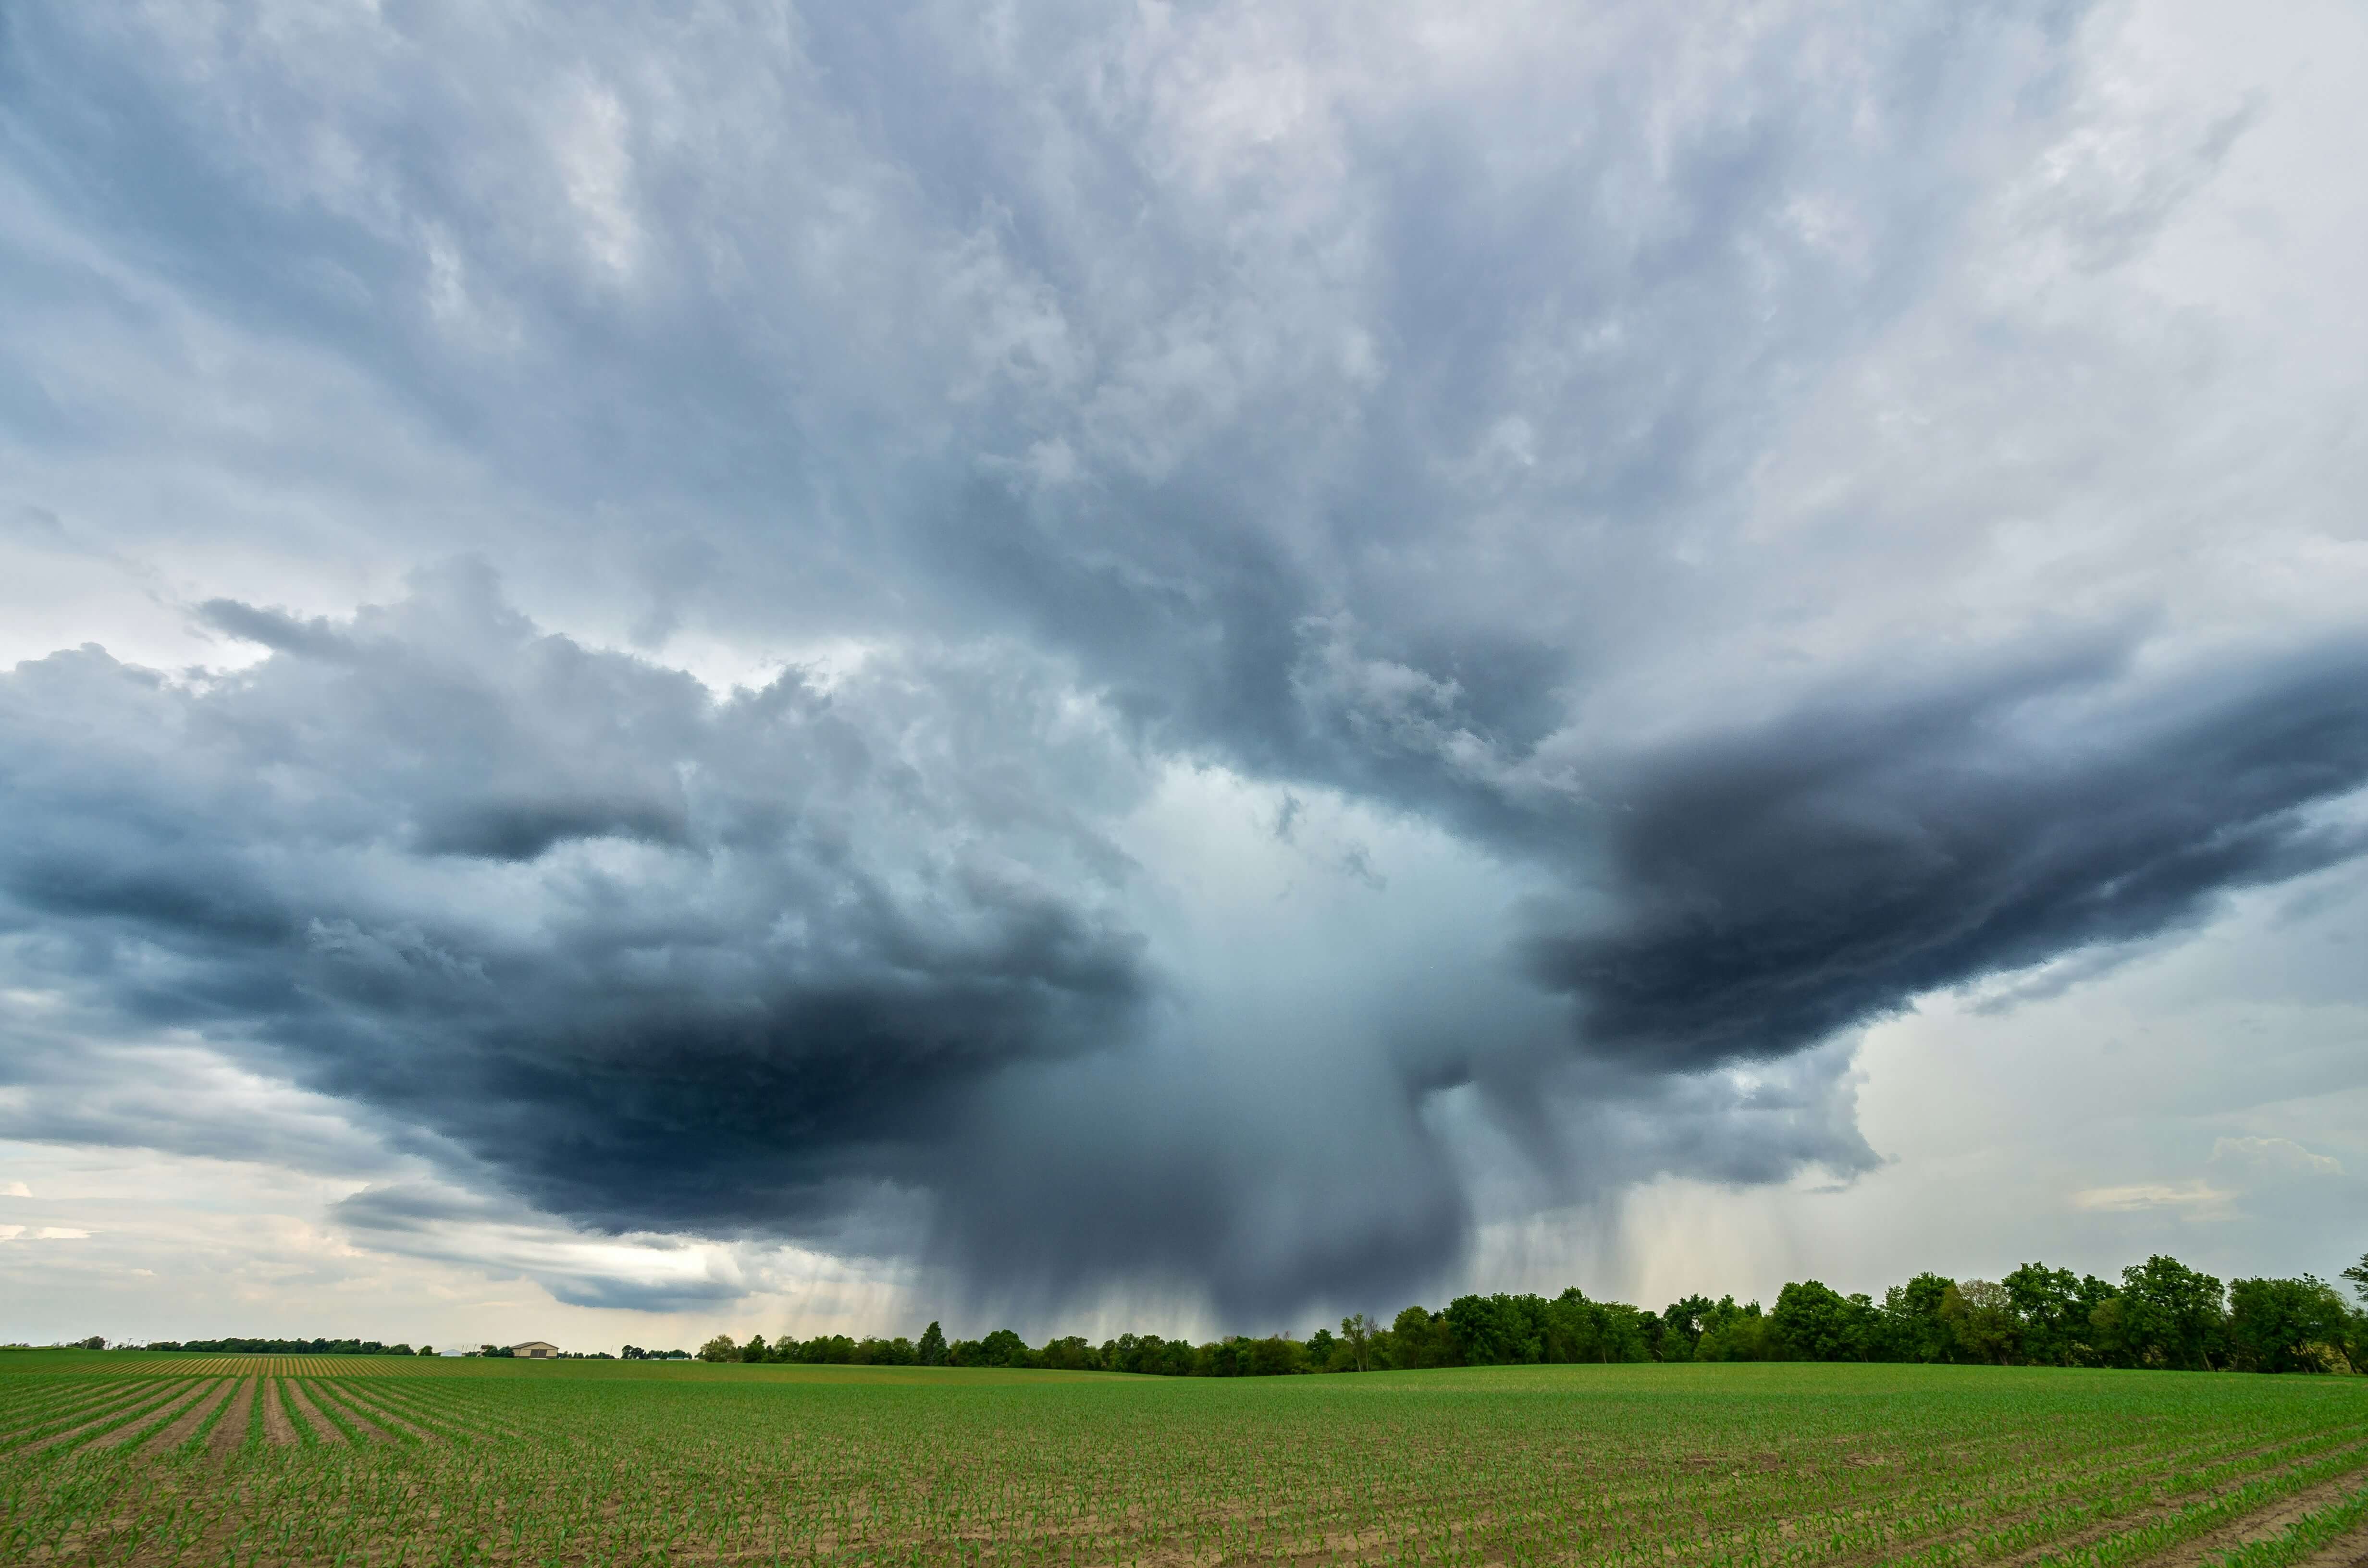 bad weather that a meteorologist did not accurately predict